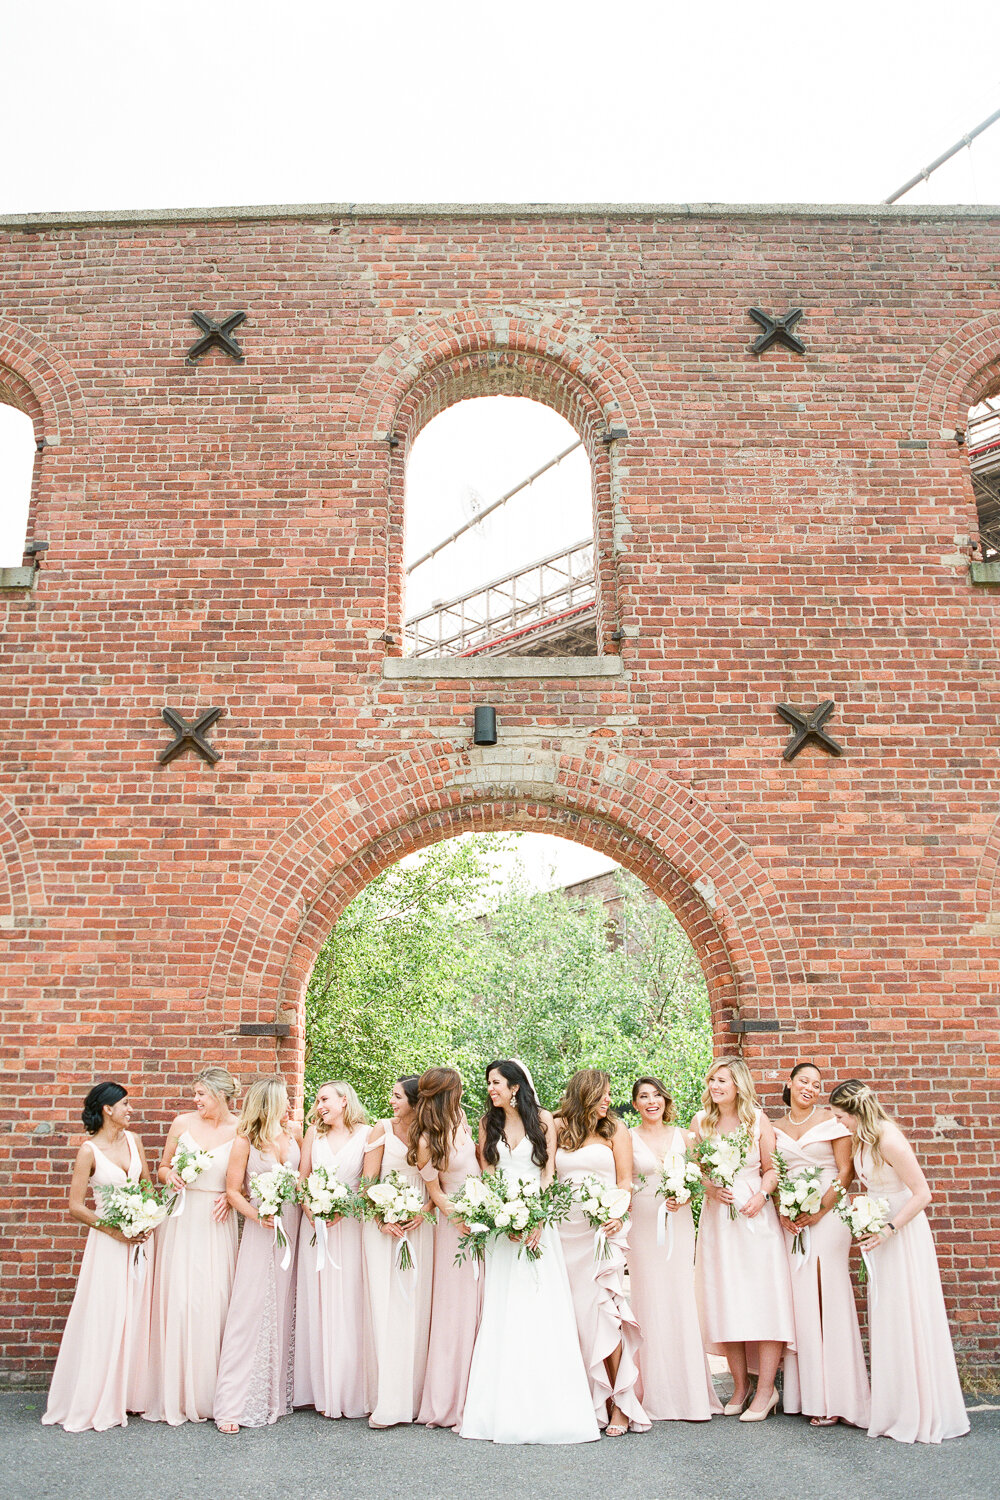 Bridal Party Photos at St. Anne's Warehouse in Brooklyn